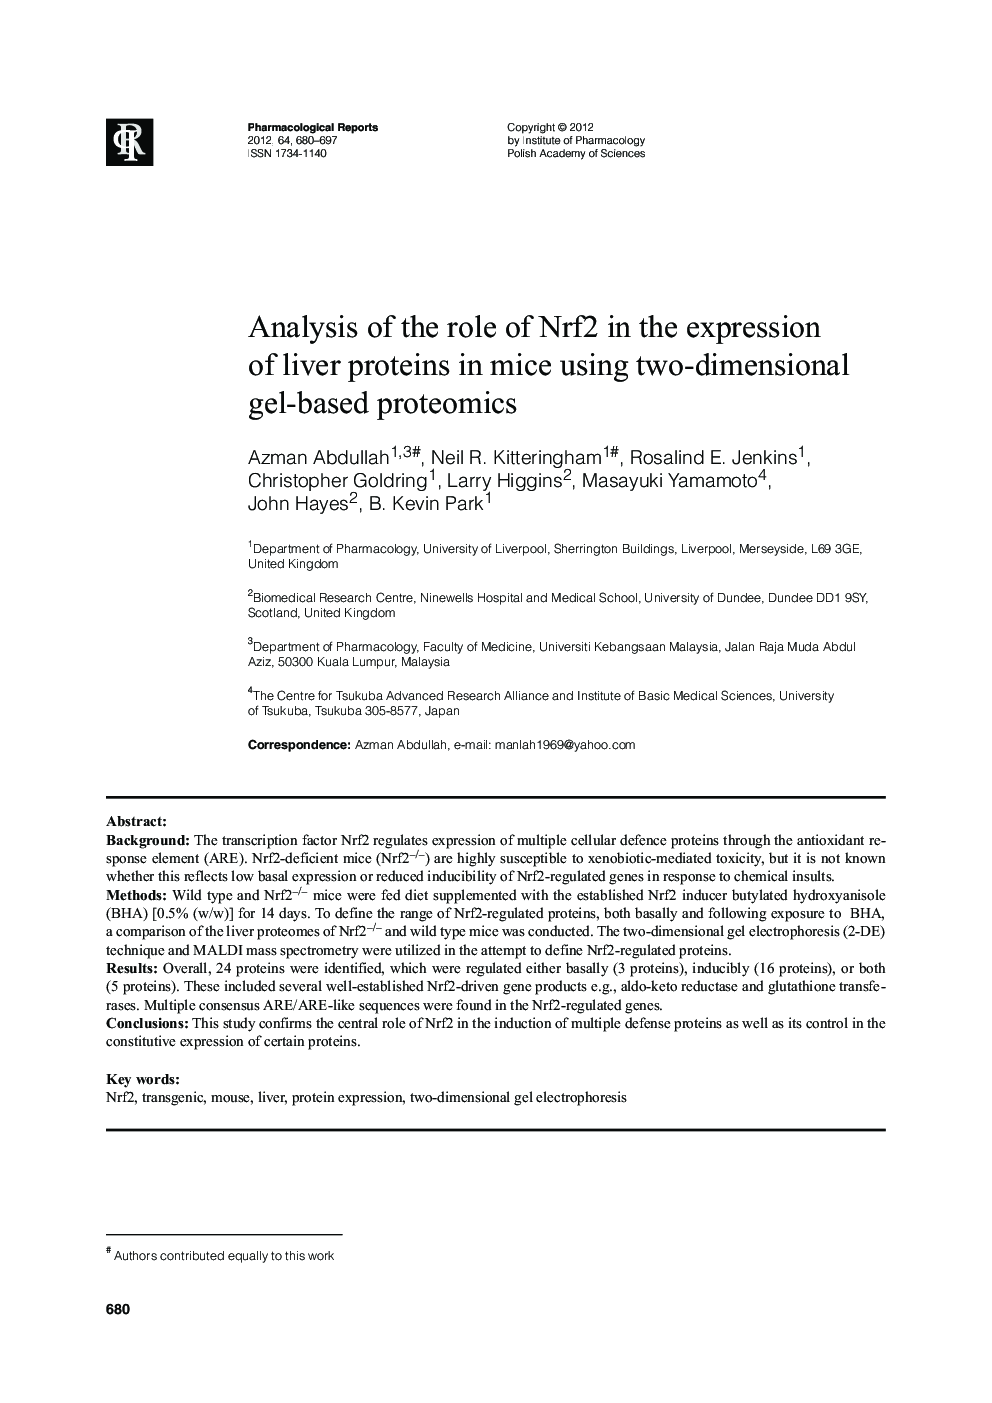 Analysis of the role of Nrf2 in the expression of liver proteins in mice using two-dimensional gel-based proteomics